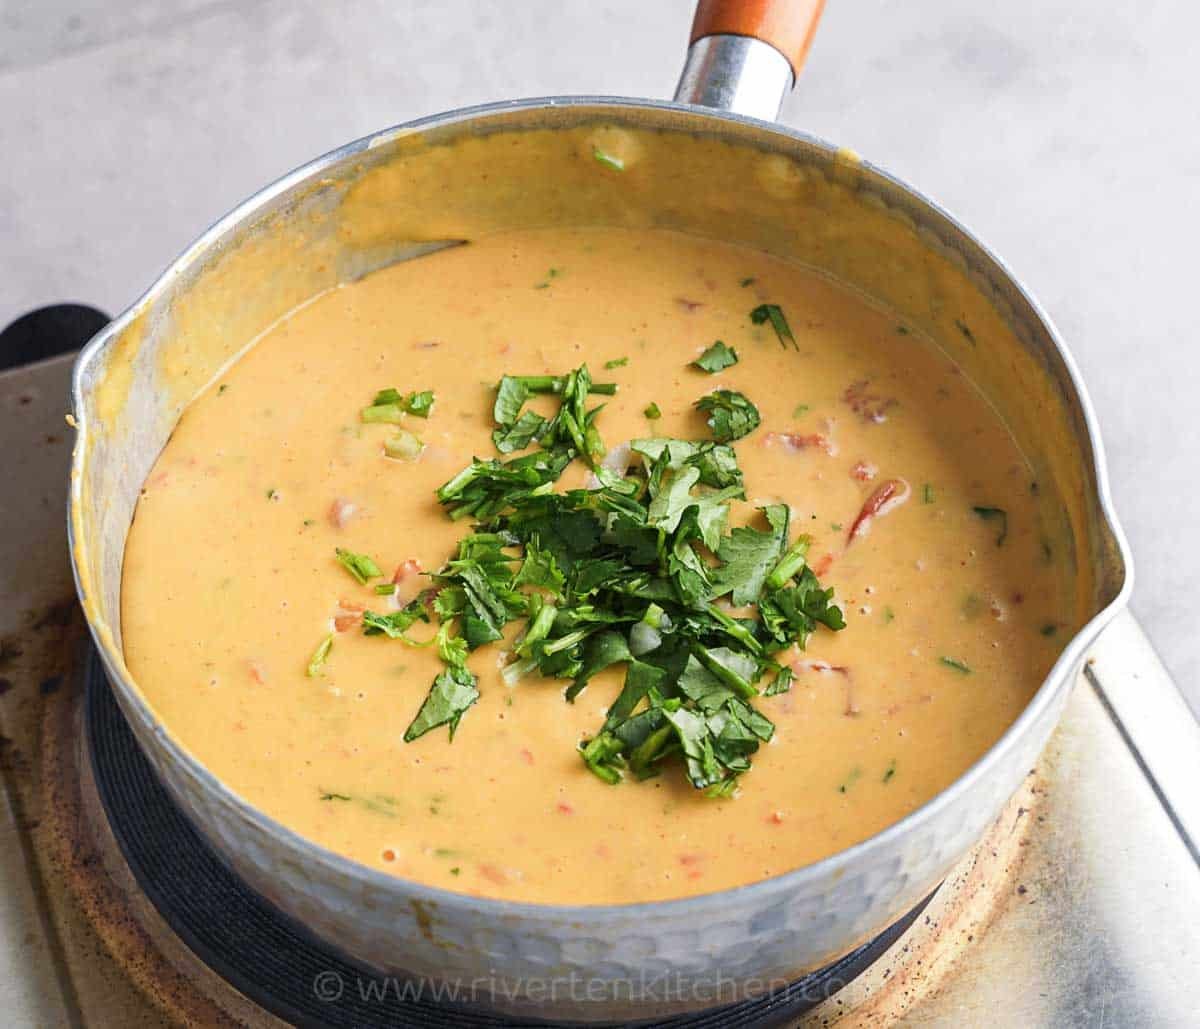 Cheese sauce with coriander in a pot.